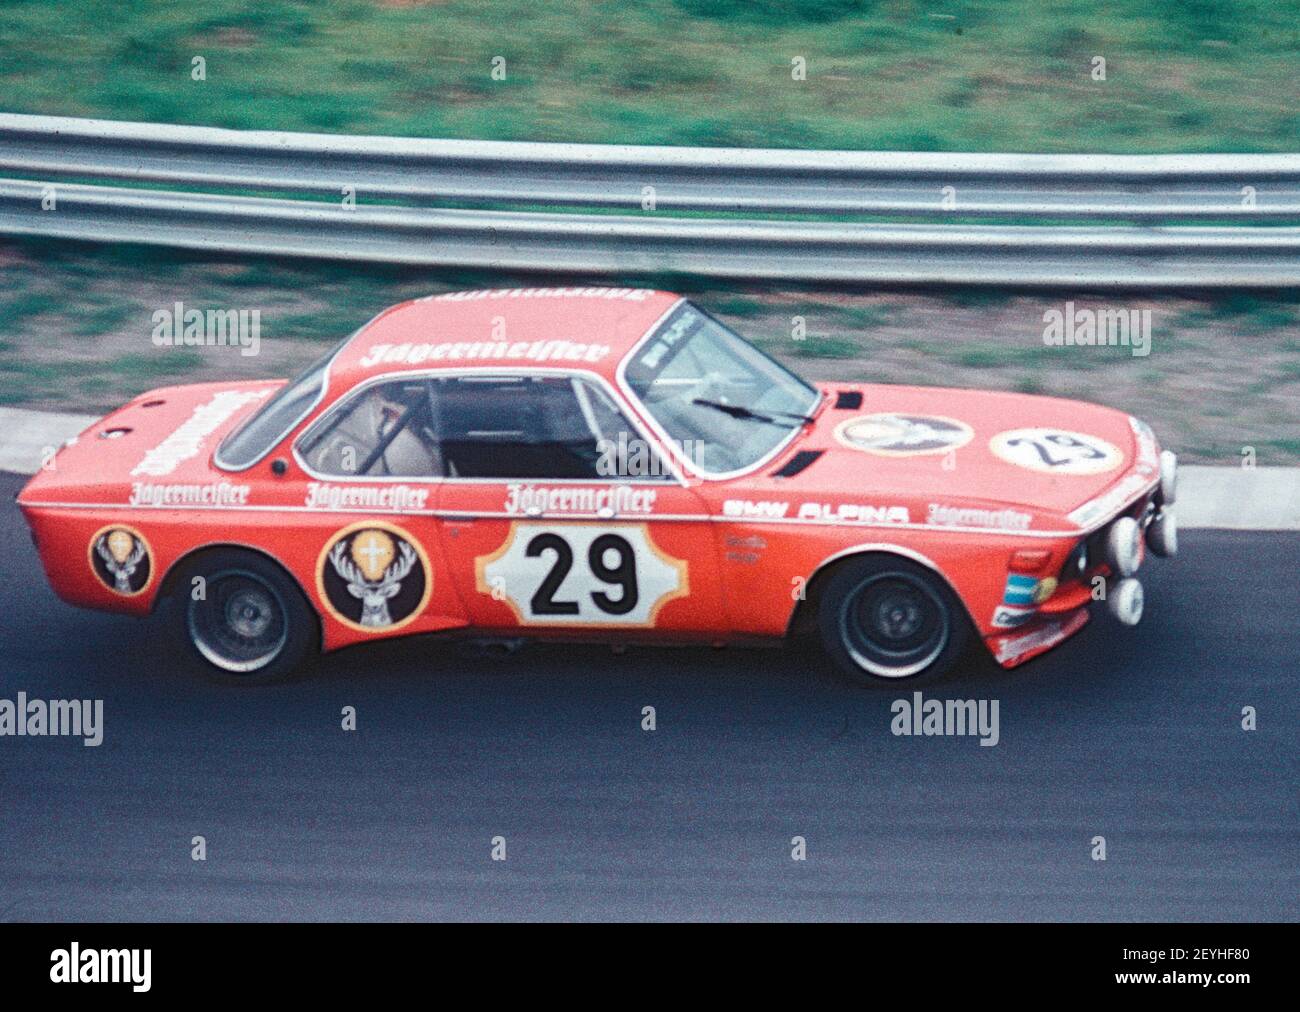 An Alpina BMW 3.0 CSL at a Touring Car race at the Nuerburgring Nordschleife in the 1970s, Eifel Germany Stock Photo